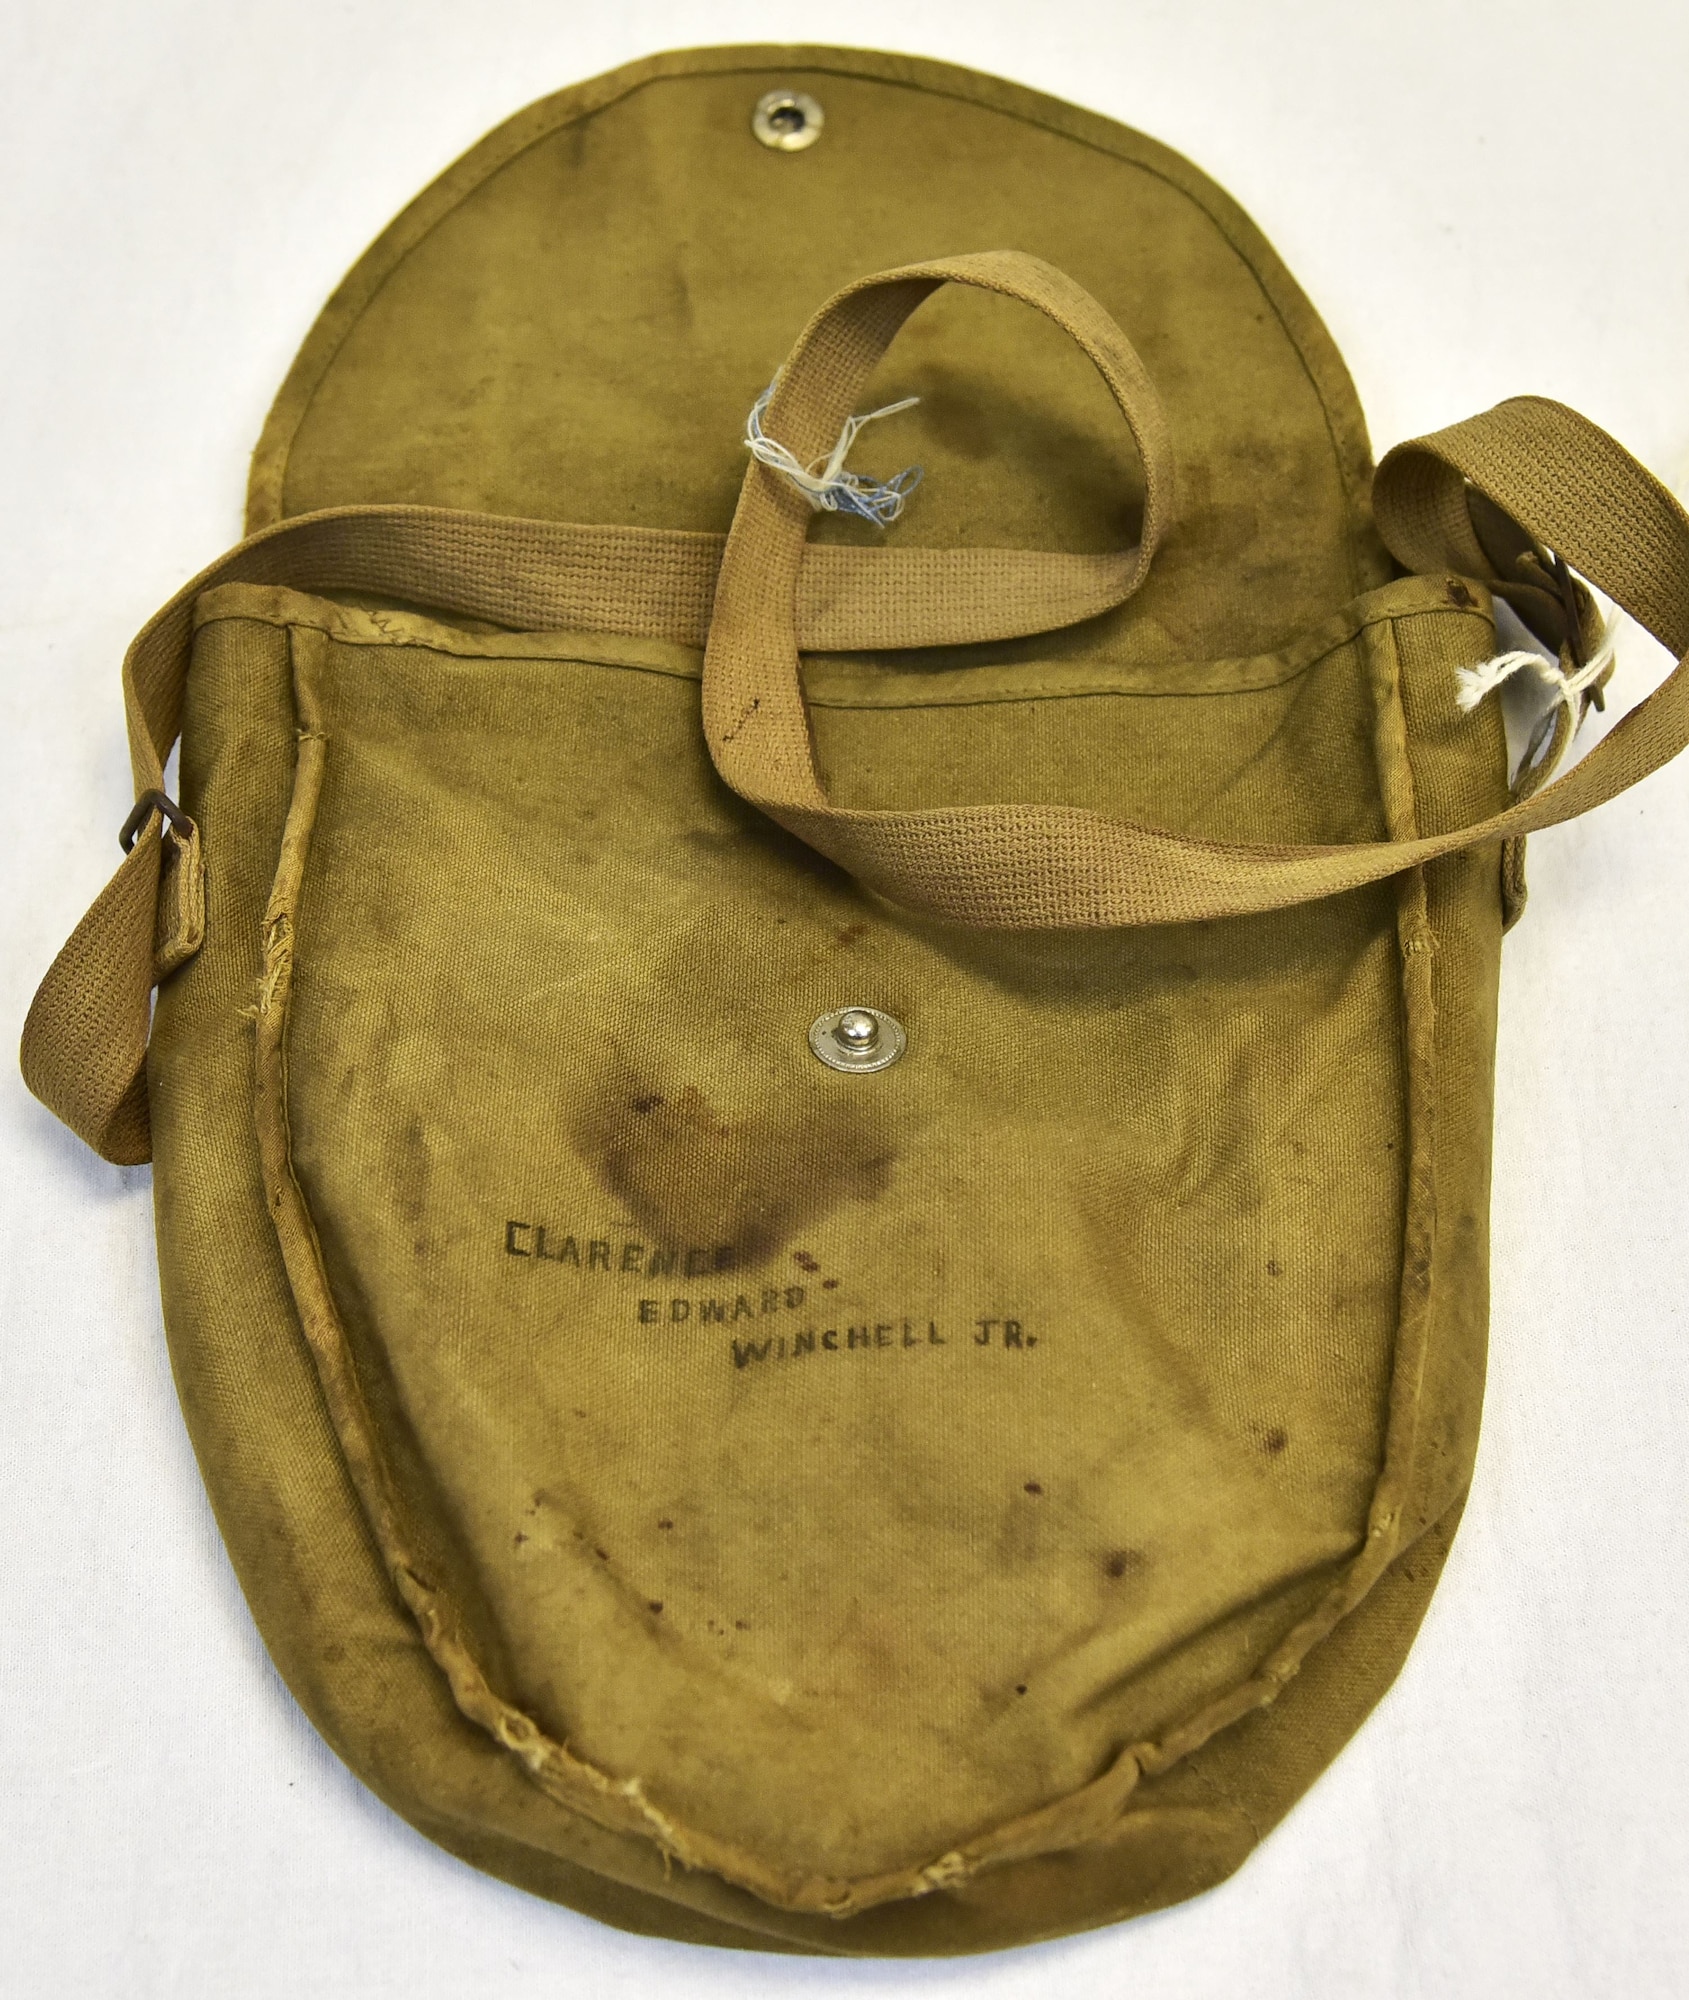 Plans call for this artifact to be displayed near the B-17F Memphis Belle™ as part of the new strategic bombardment exhibit in the WWII Gallery, which opens to the public on May 17, 2018. Utility bag used by Memphis Belle waist gunner SSgt William “Bill” Winchell.